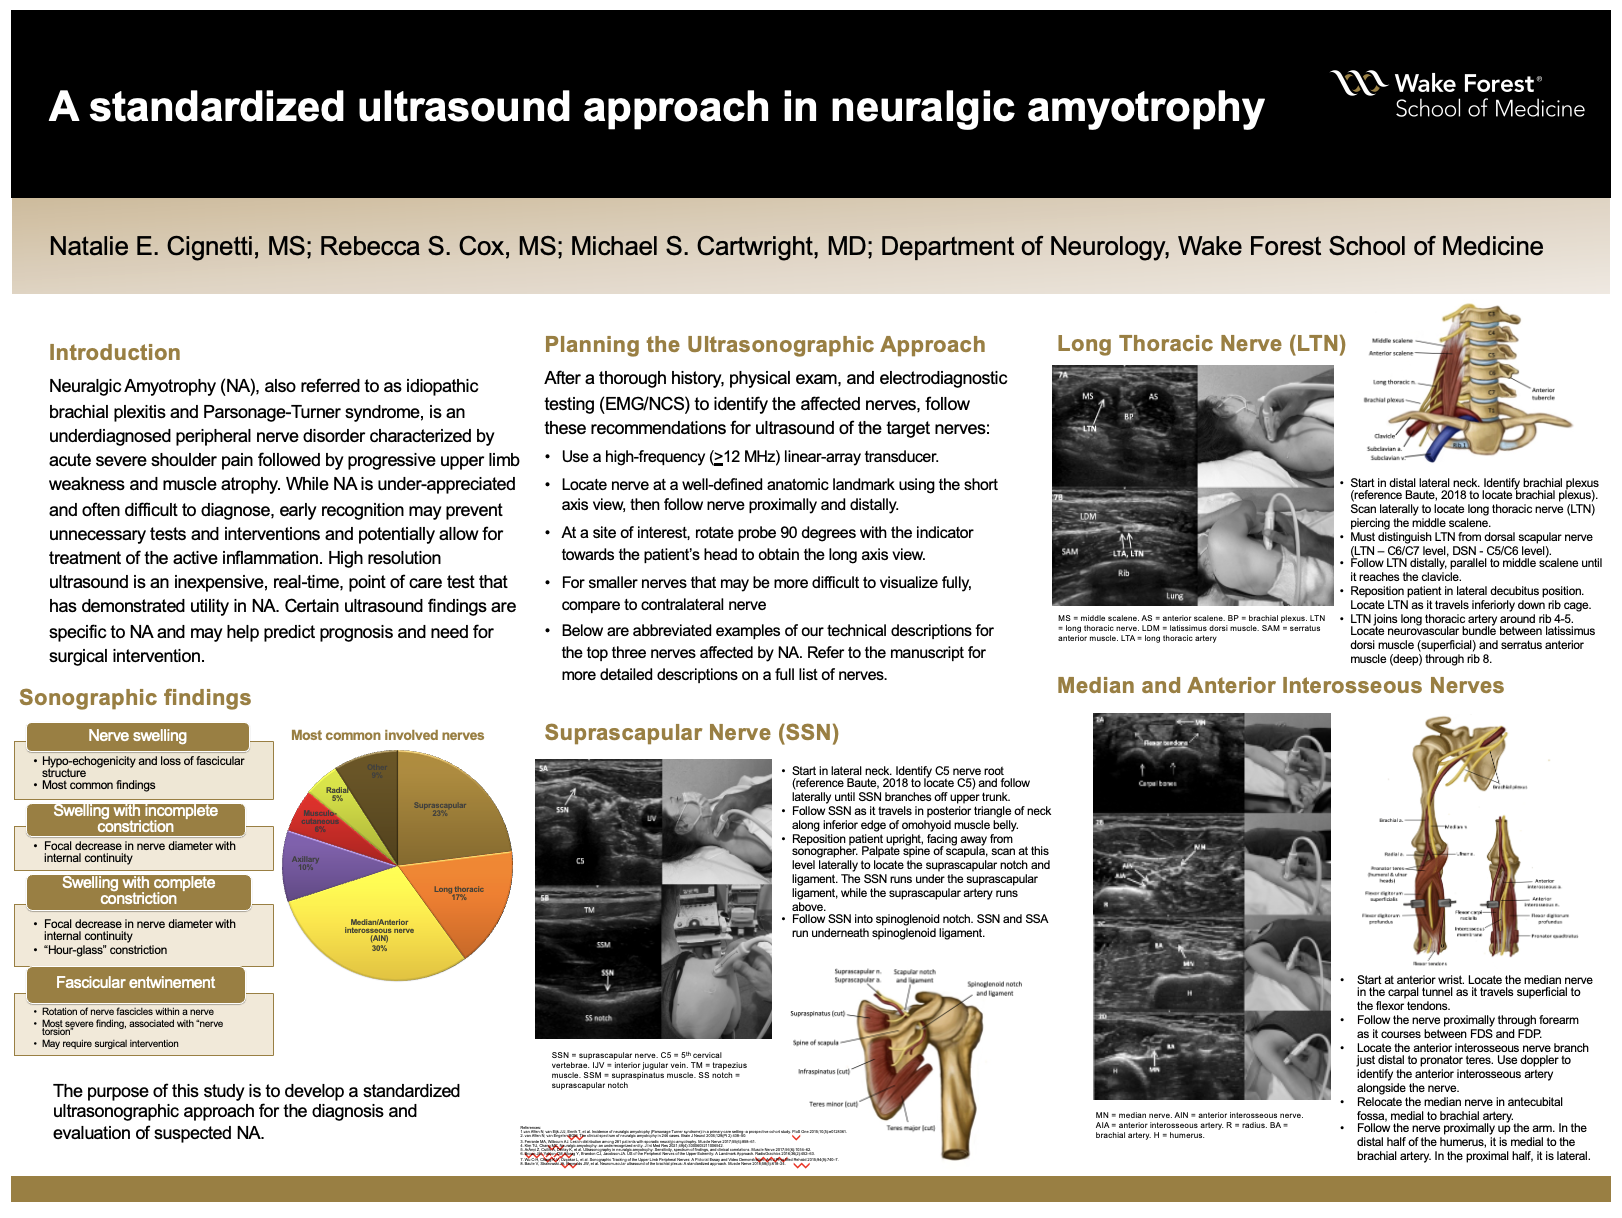 Showcase Image for A standardized ultrasound approach in neuralgic amyotrophy